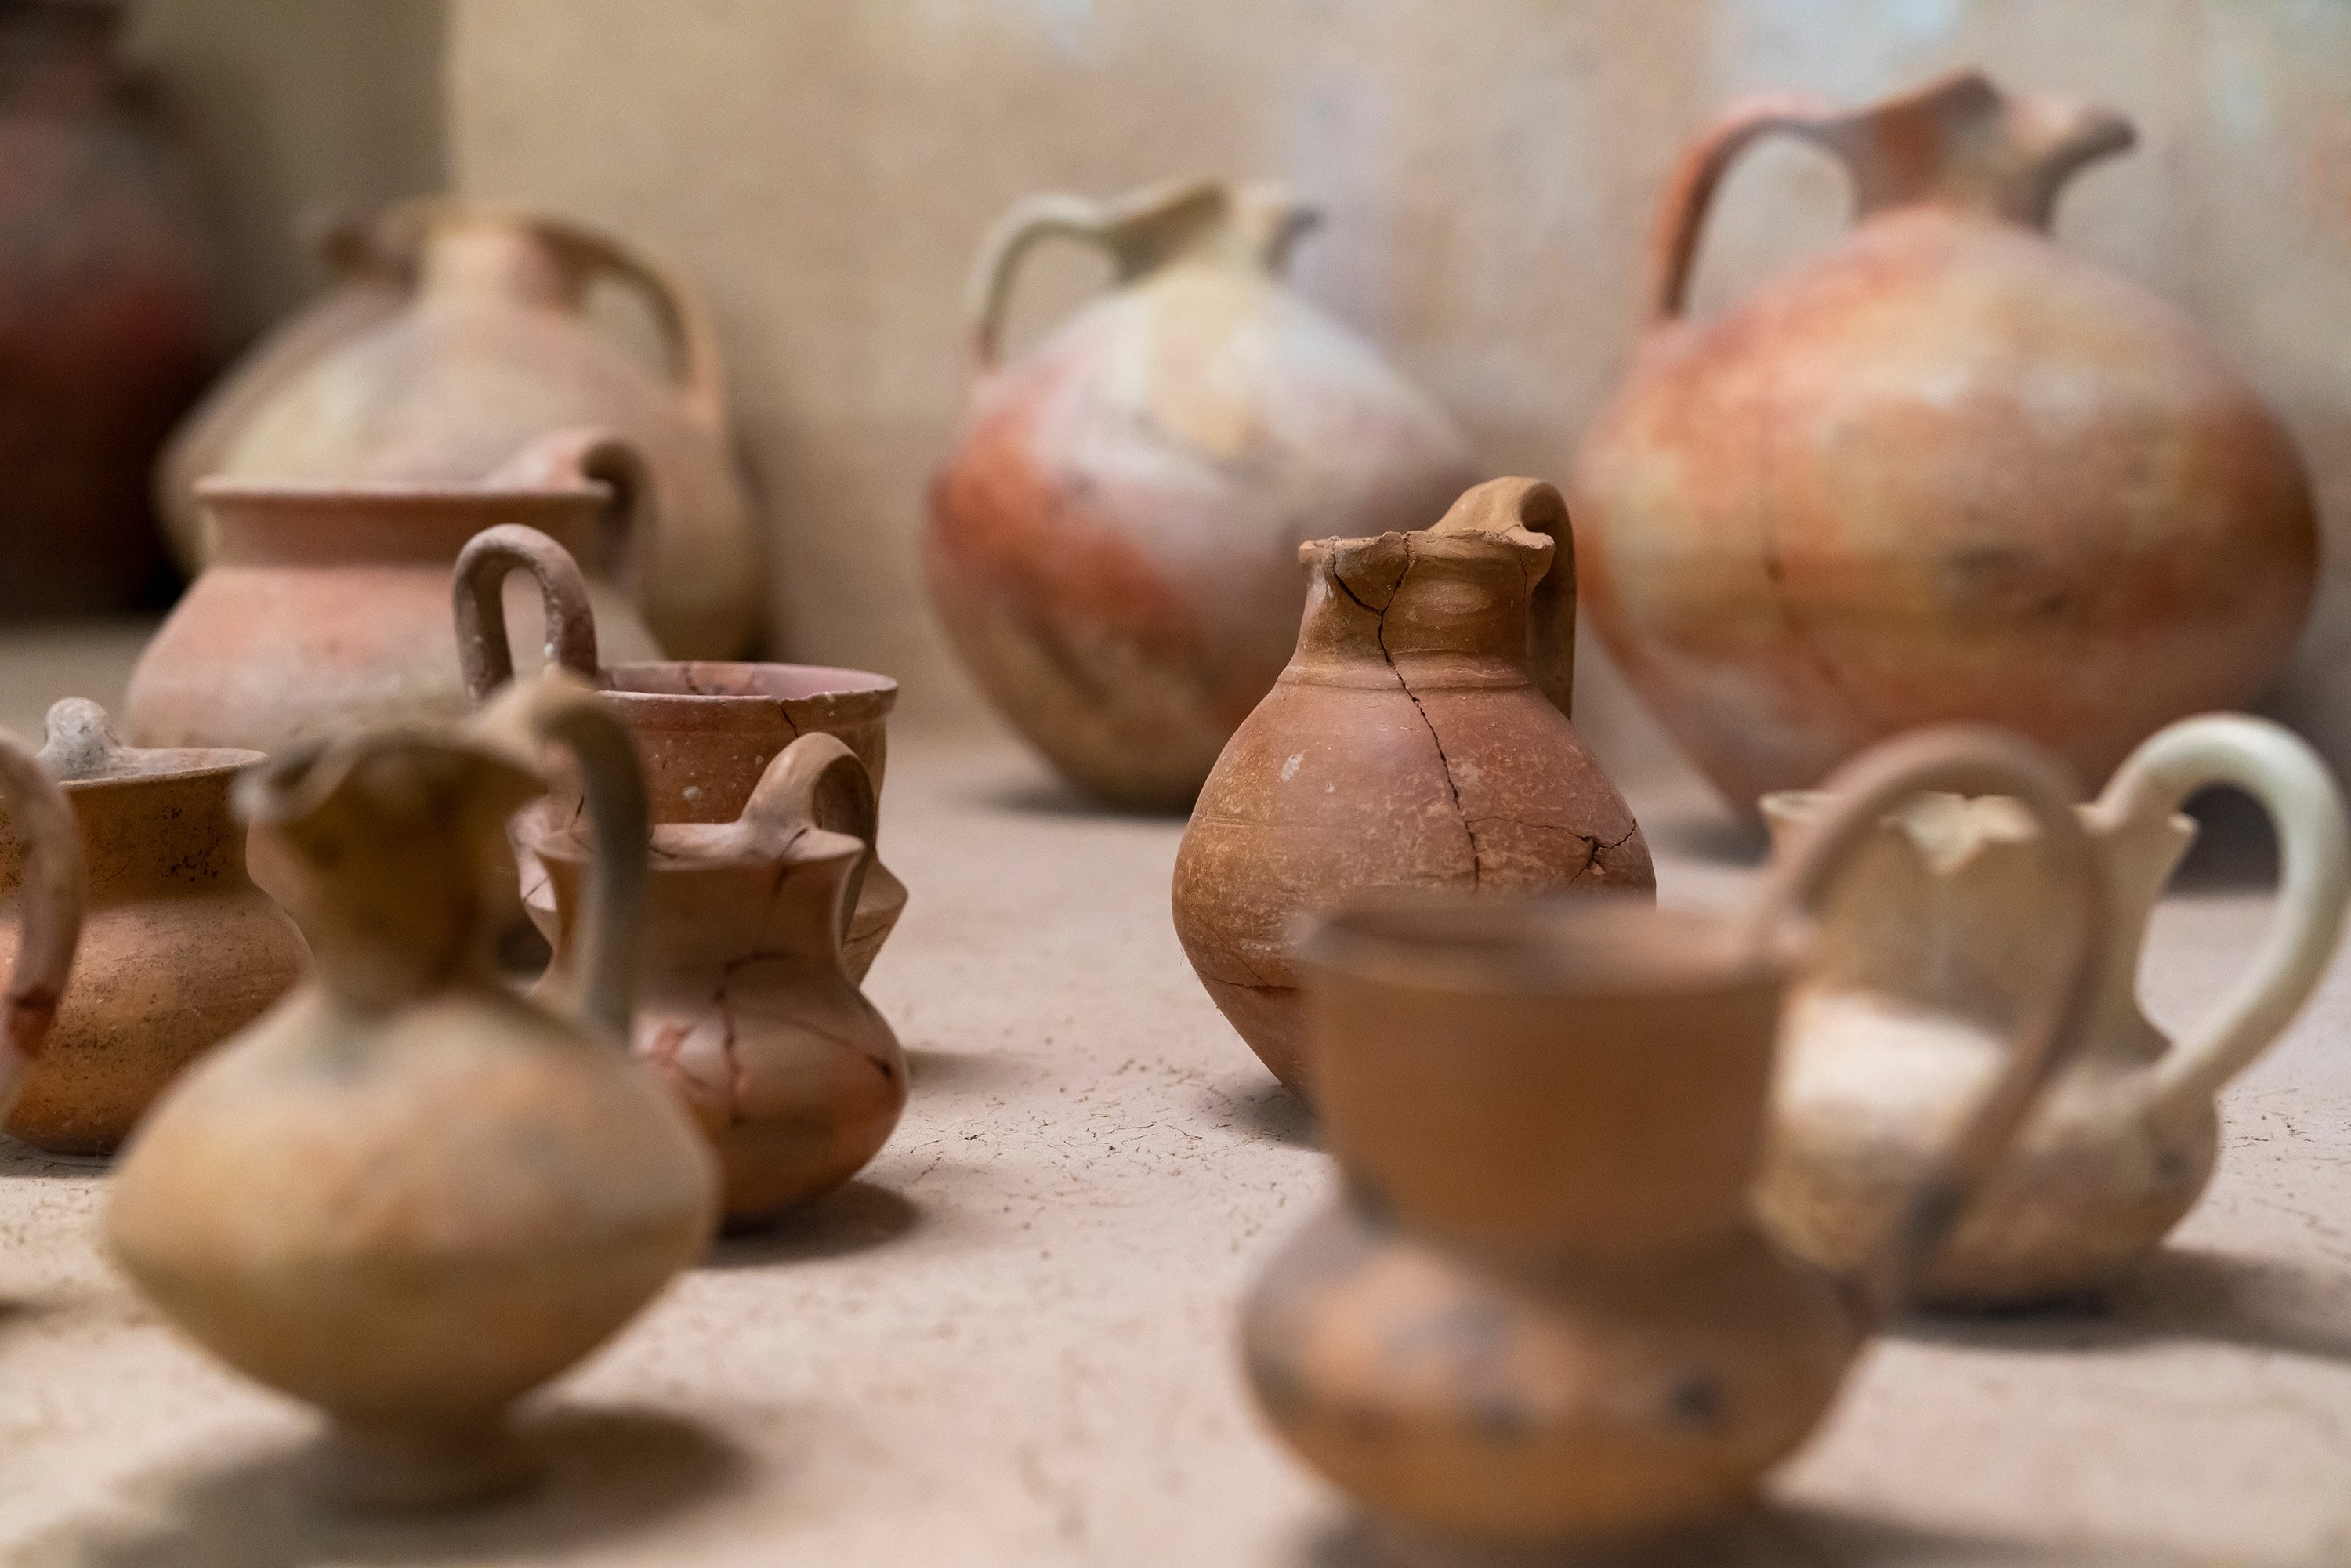 Potteries excavated from the archaeological site are displayed at Gordion Museum in Yassıhöyük, Ankara, Dec. 8, 2018. (Shutterstock Photo)